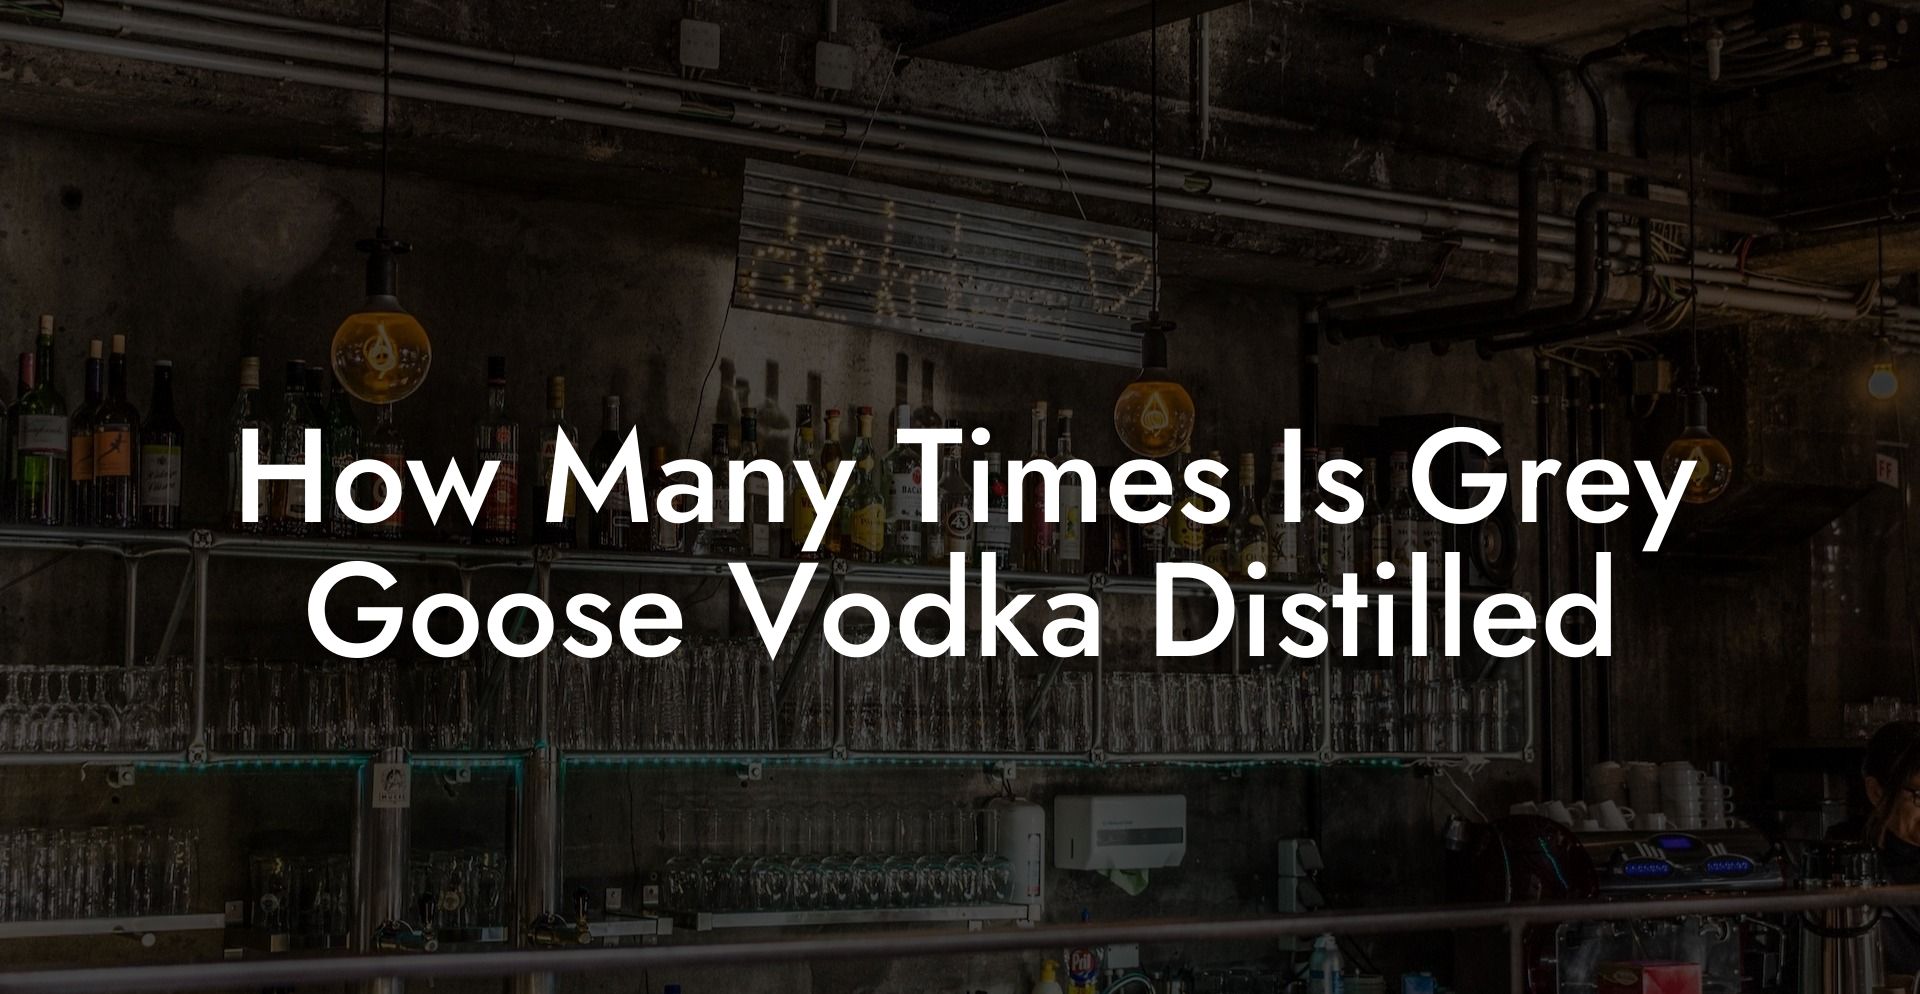 How Many Times Is Grey Goose Vodka Distilled